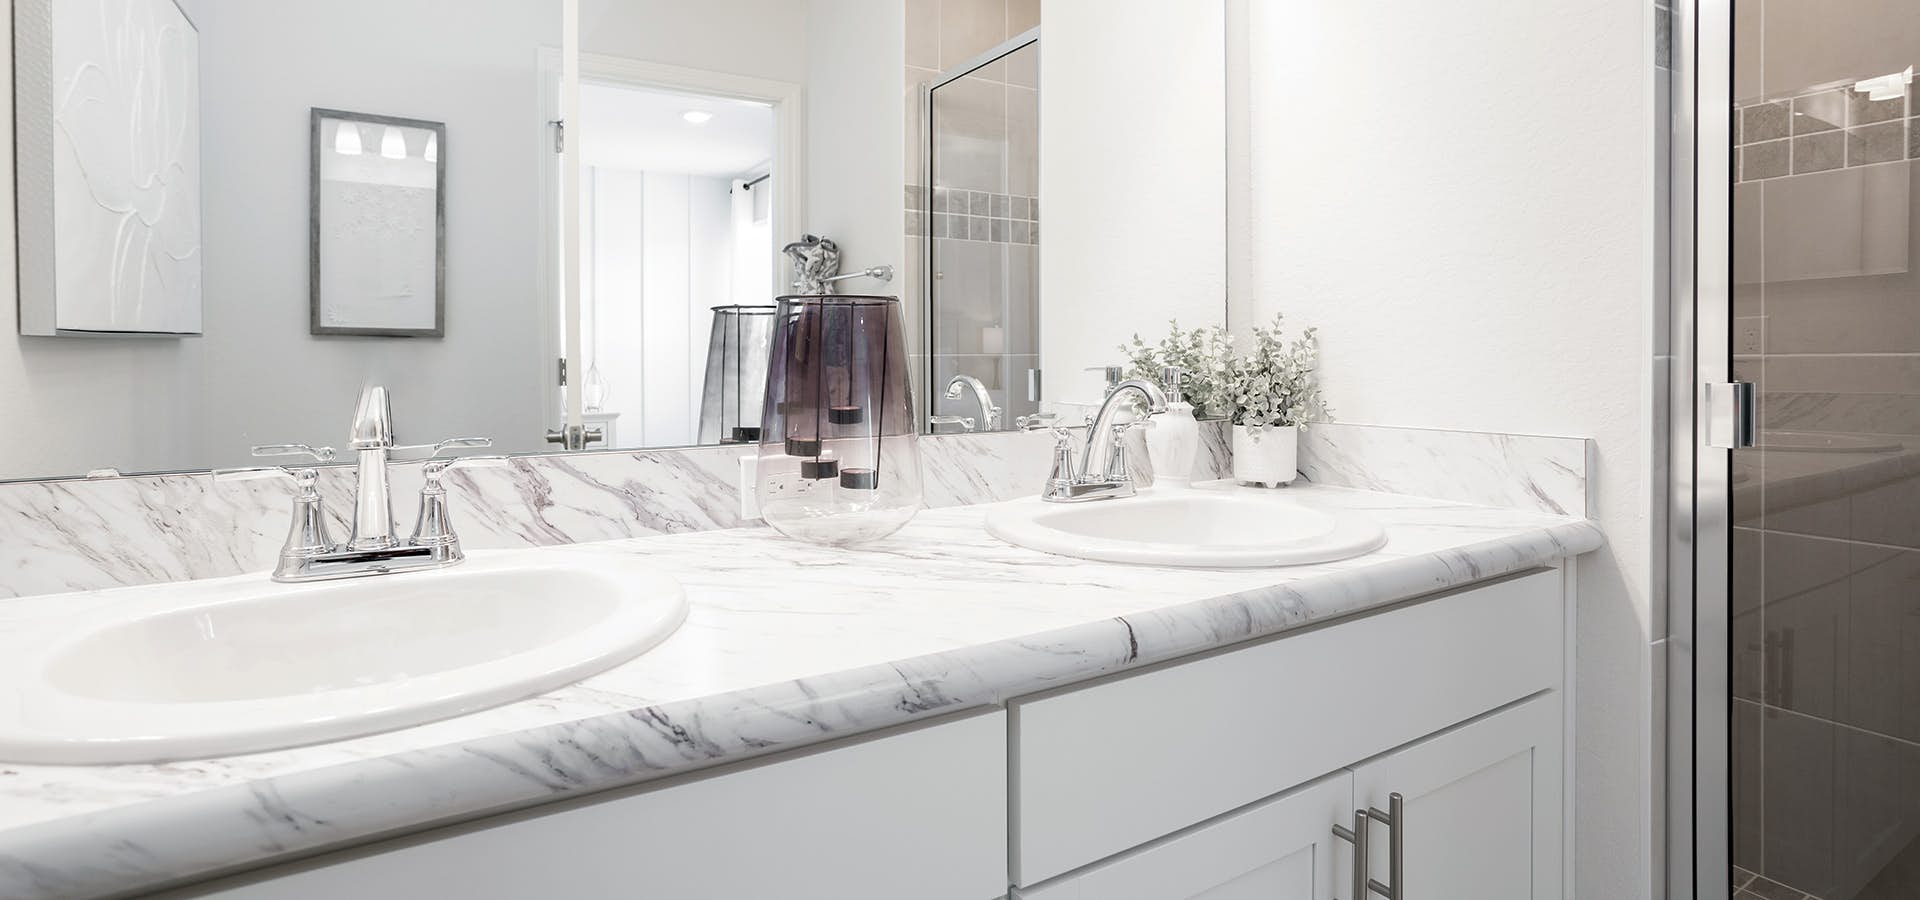 Large bathroom vanity with white cabinets and glass-enclosed shower